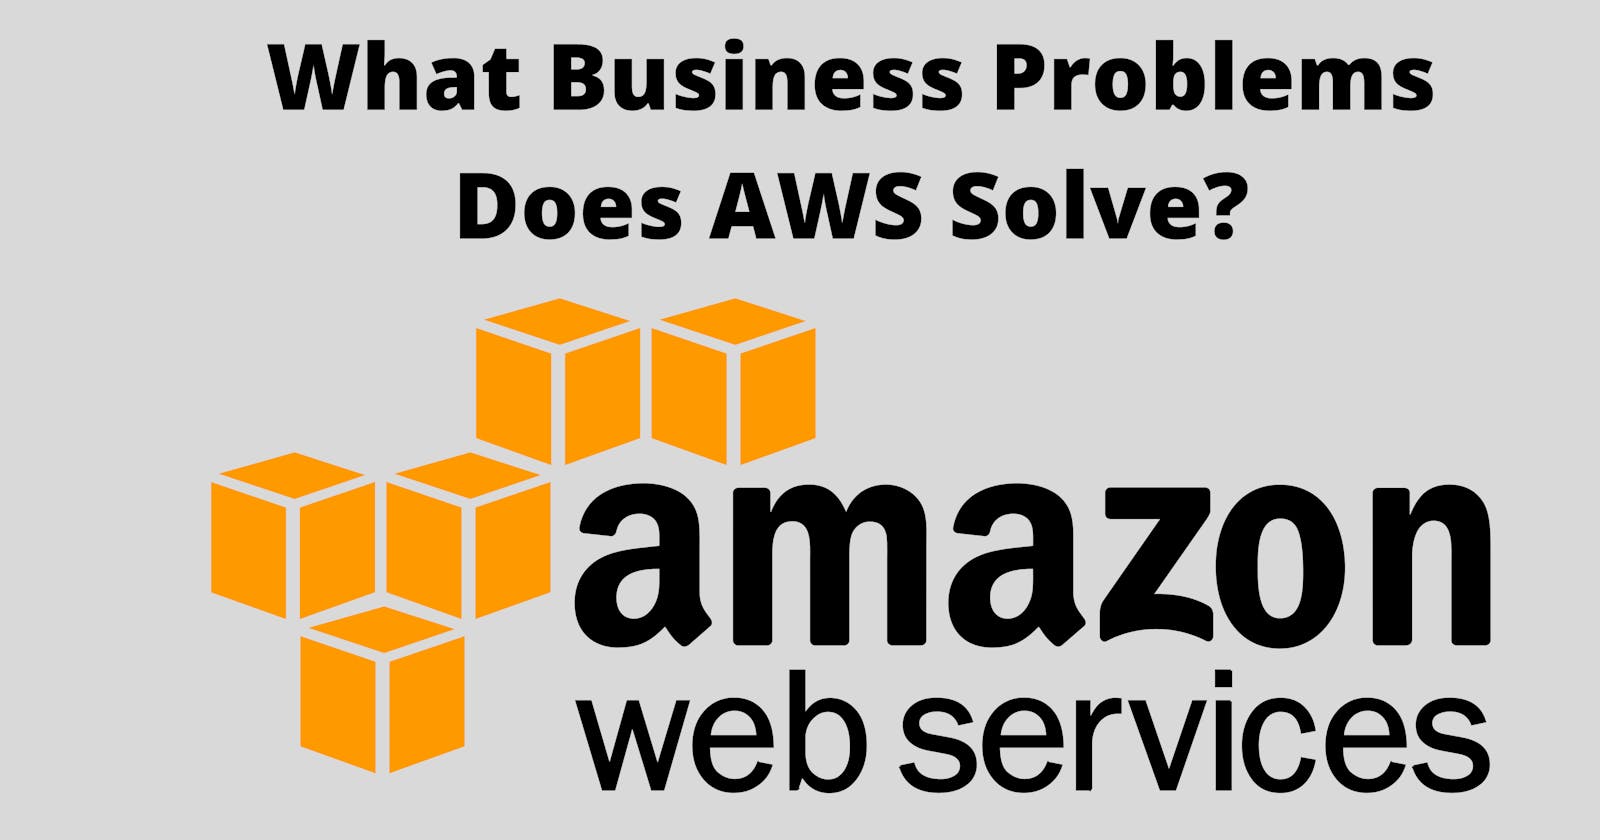 What Business Problems Does AWS Solve?